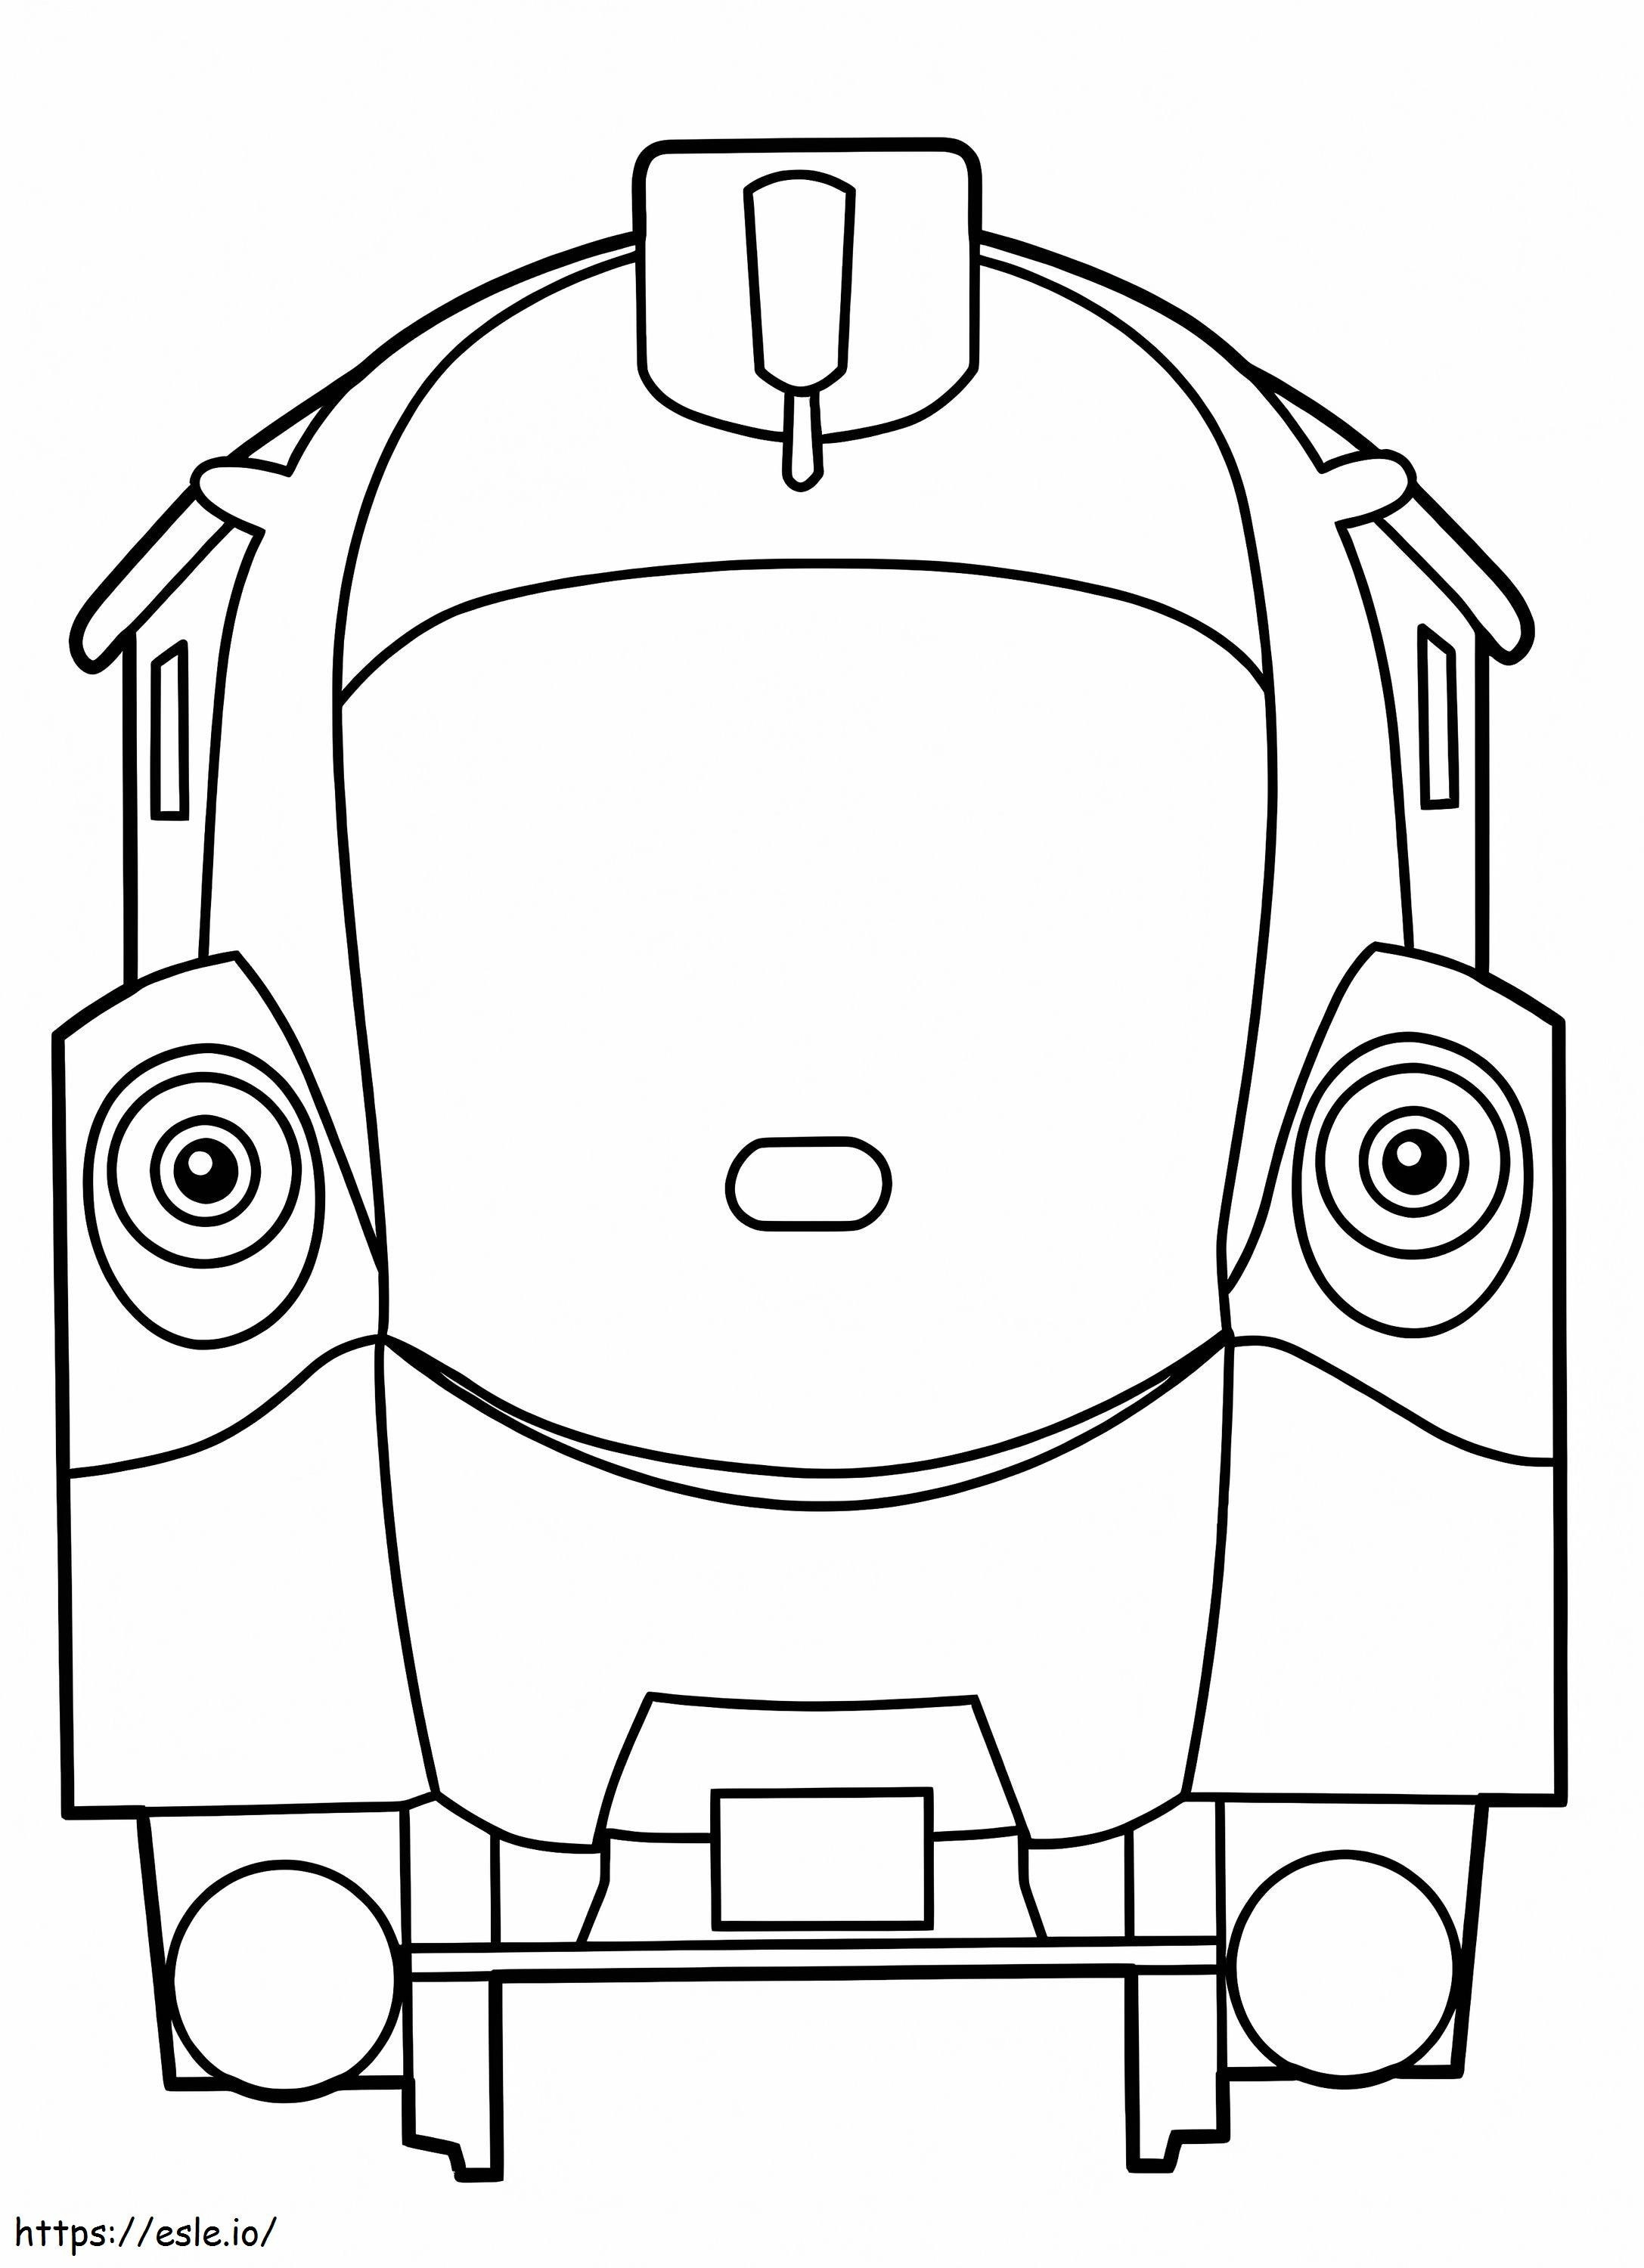 Olwin From Chuggington coloring page